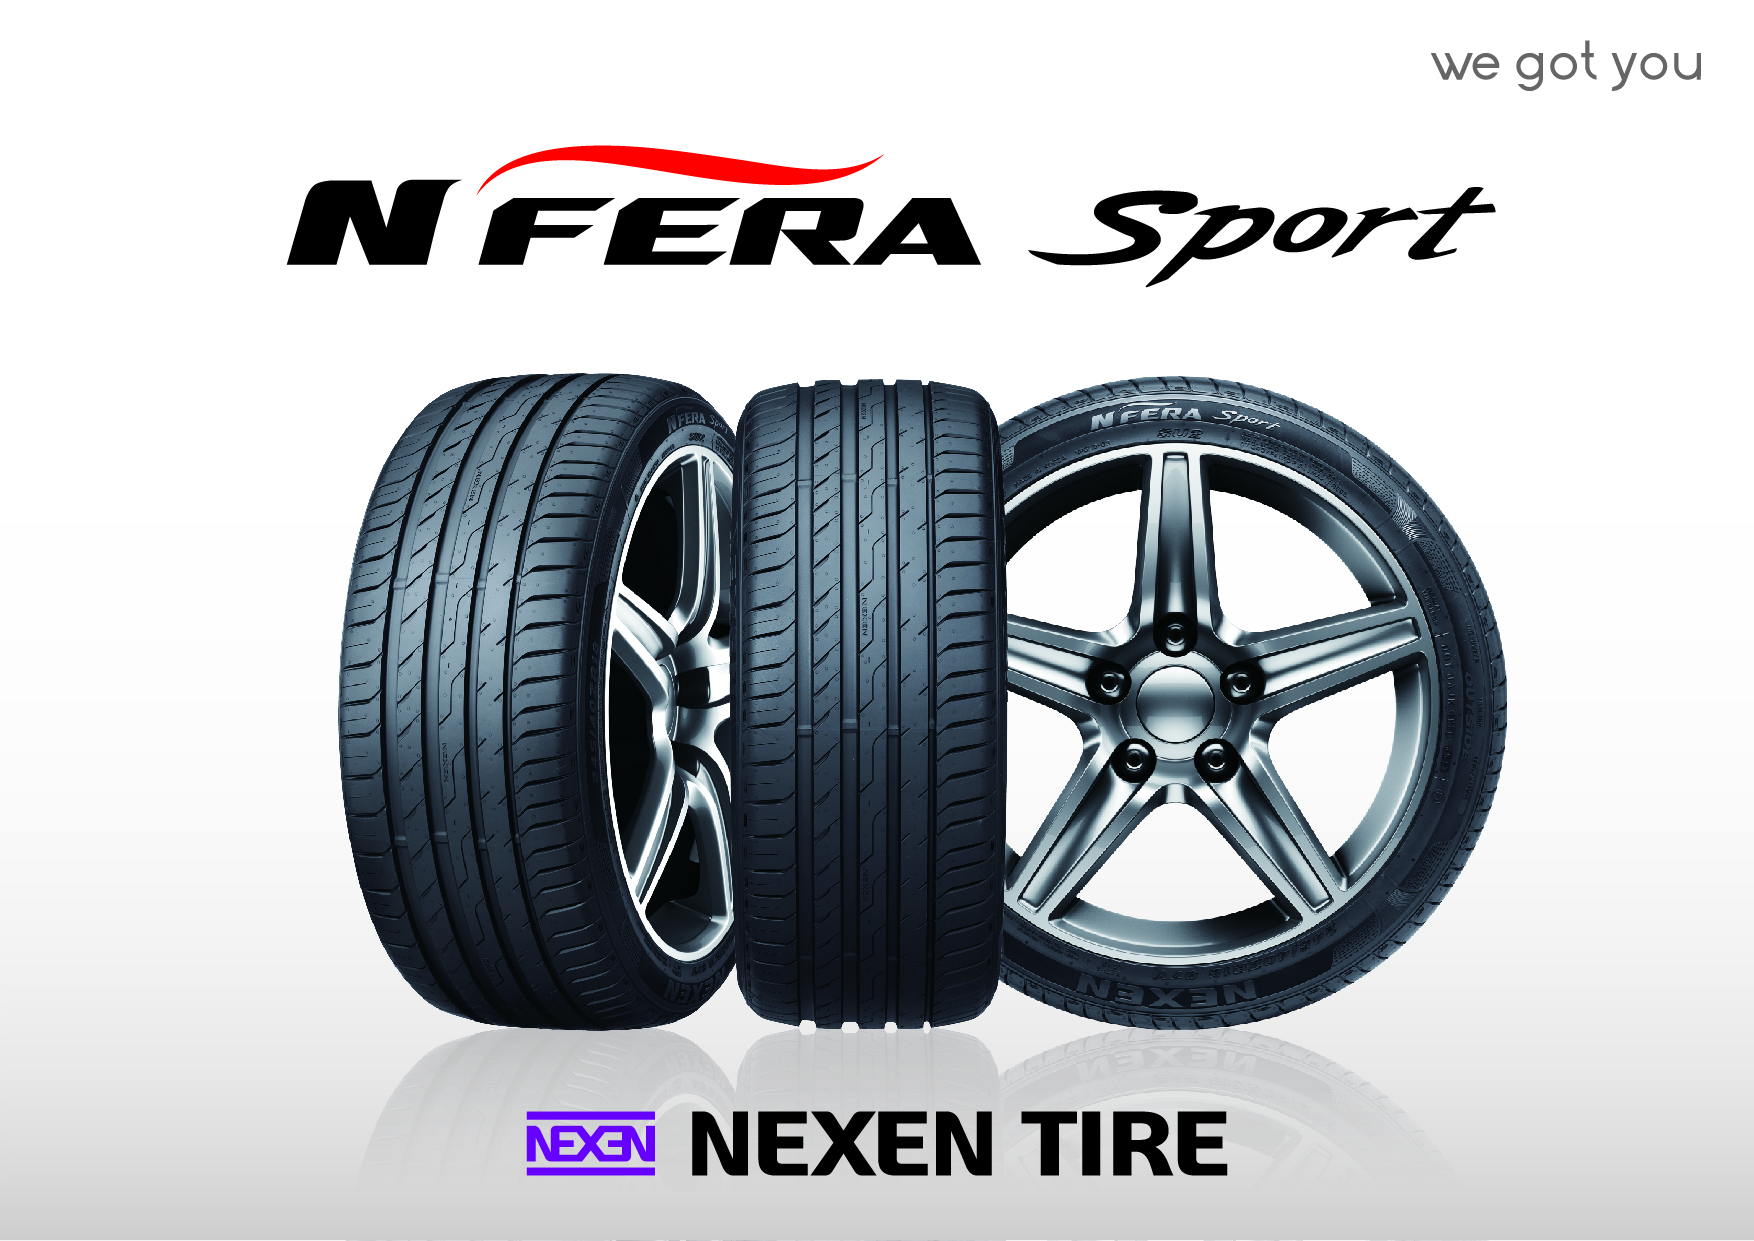 Nexen Tire N'FERA SPORT Golf and Leon approved by VW and Leon